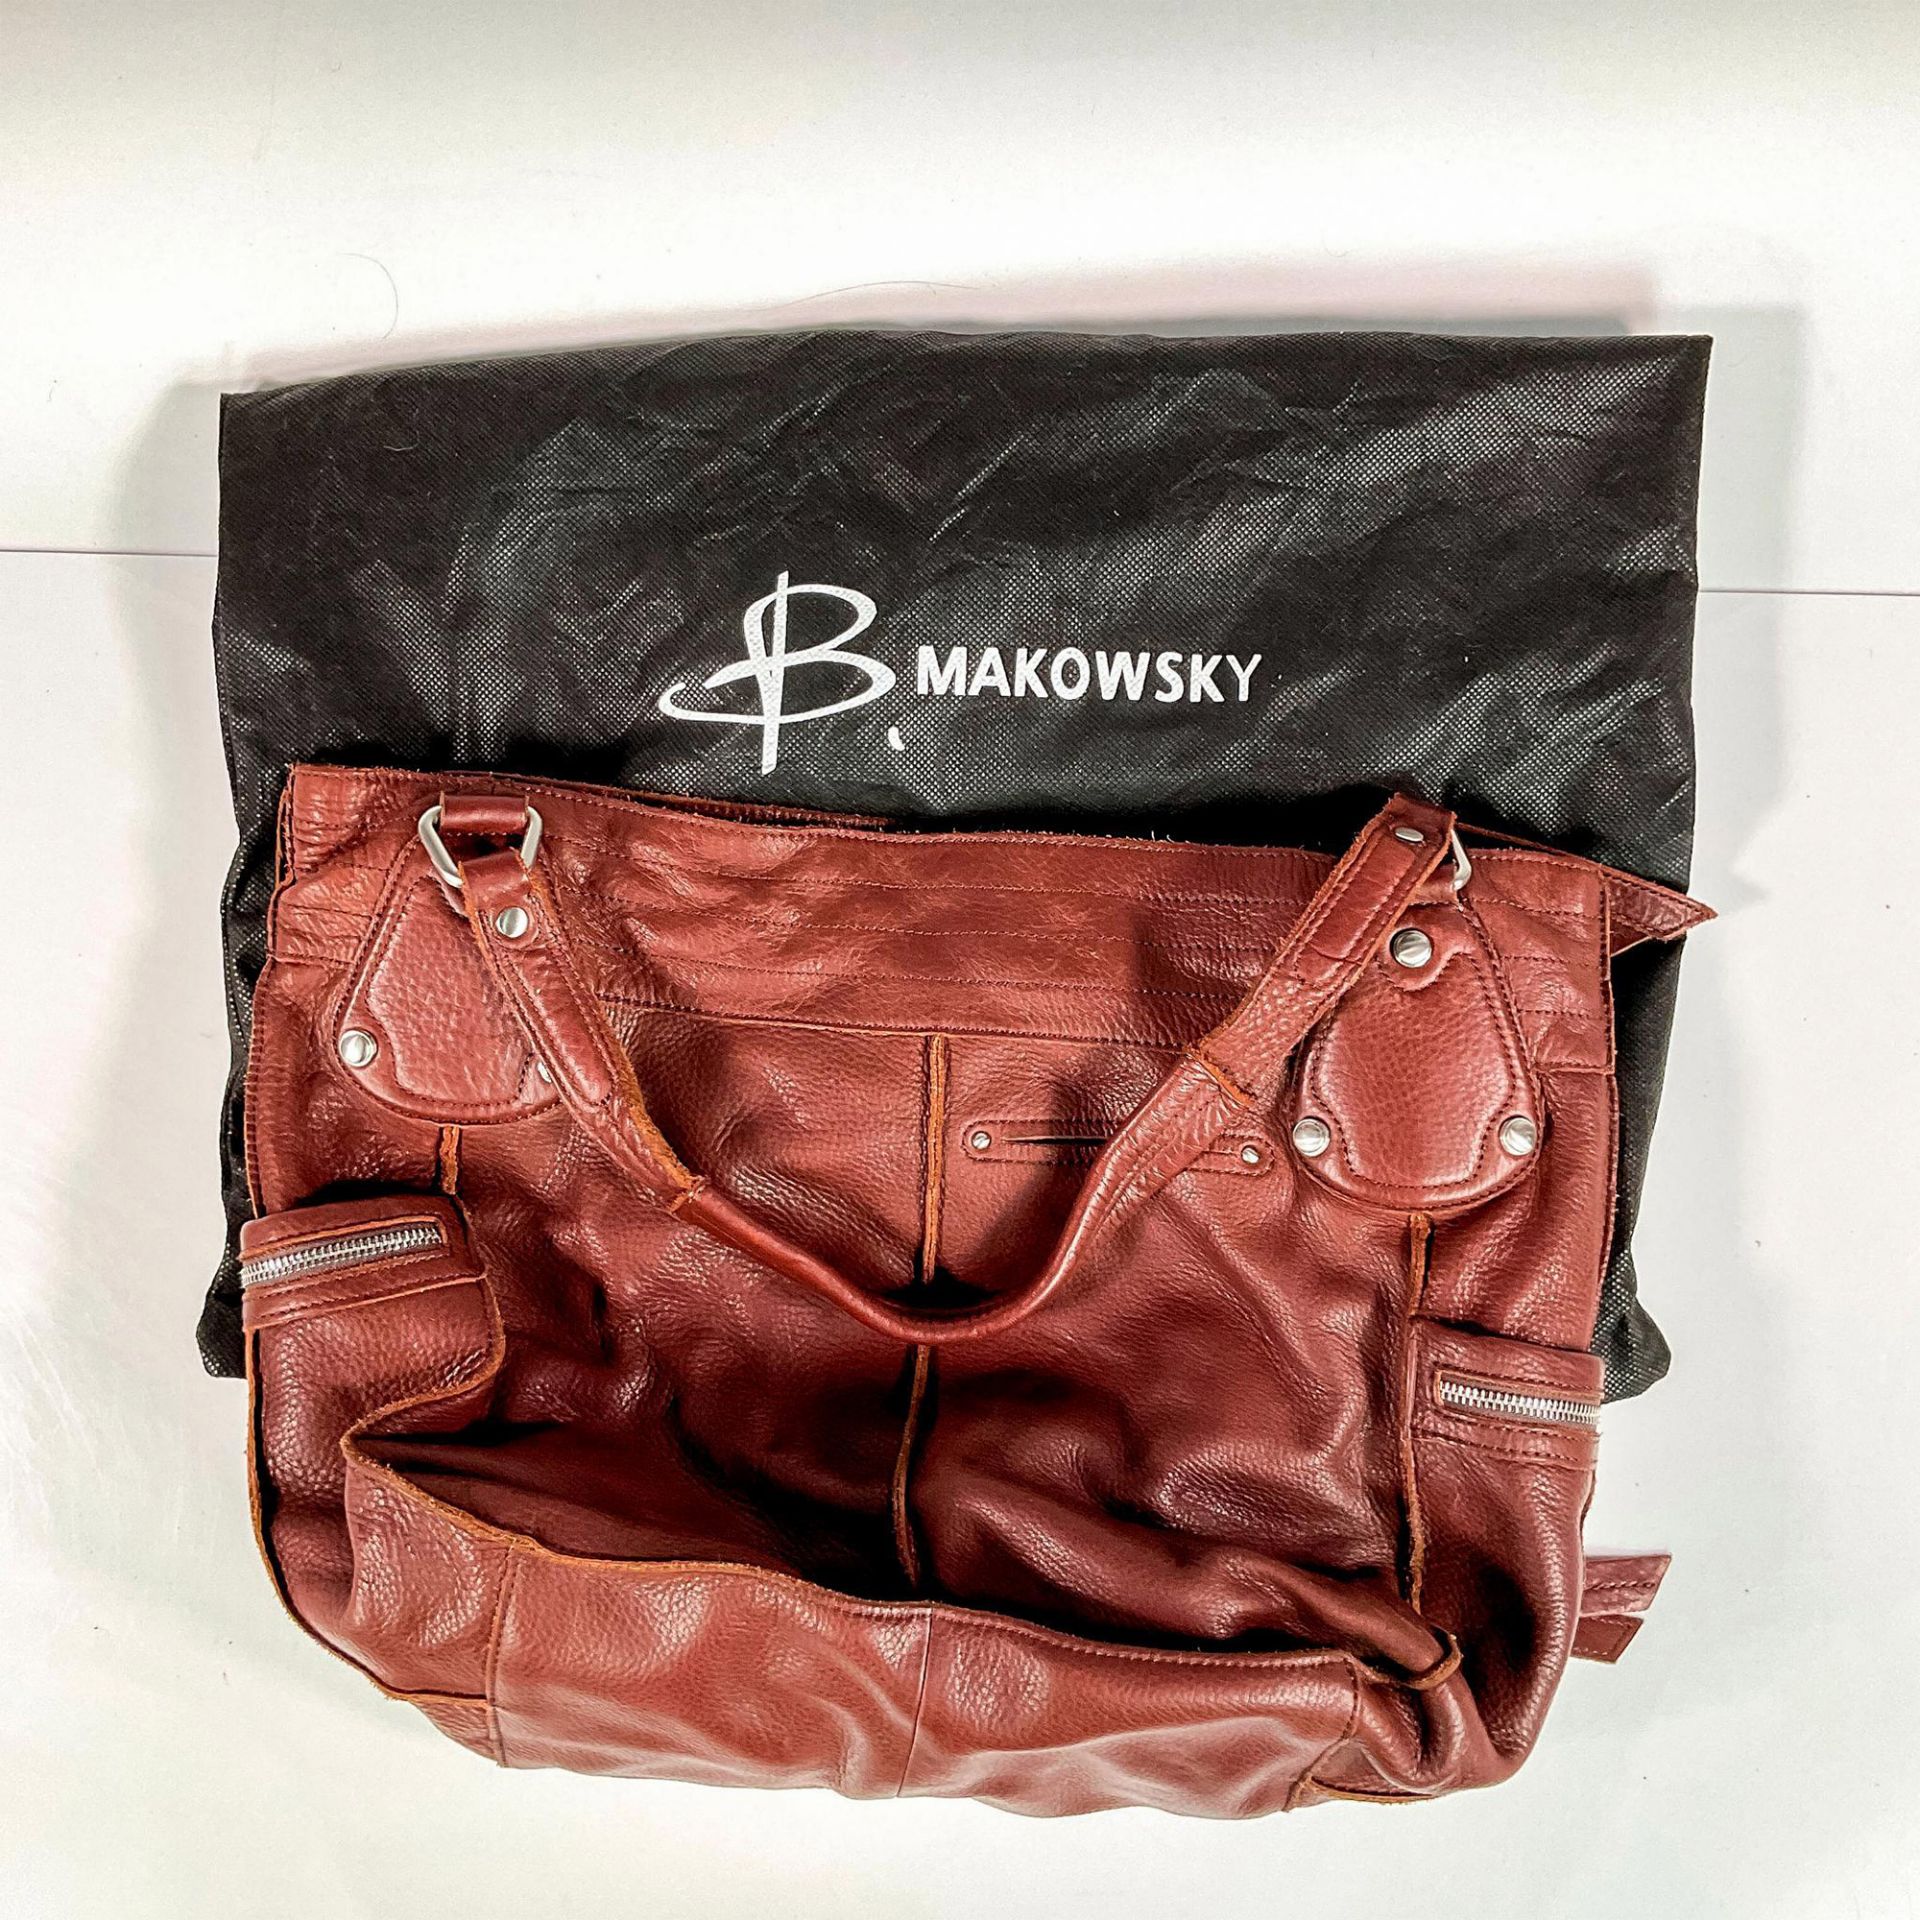 BMakowsky Leather Hobo Tote Bag - Image 3 of 6